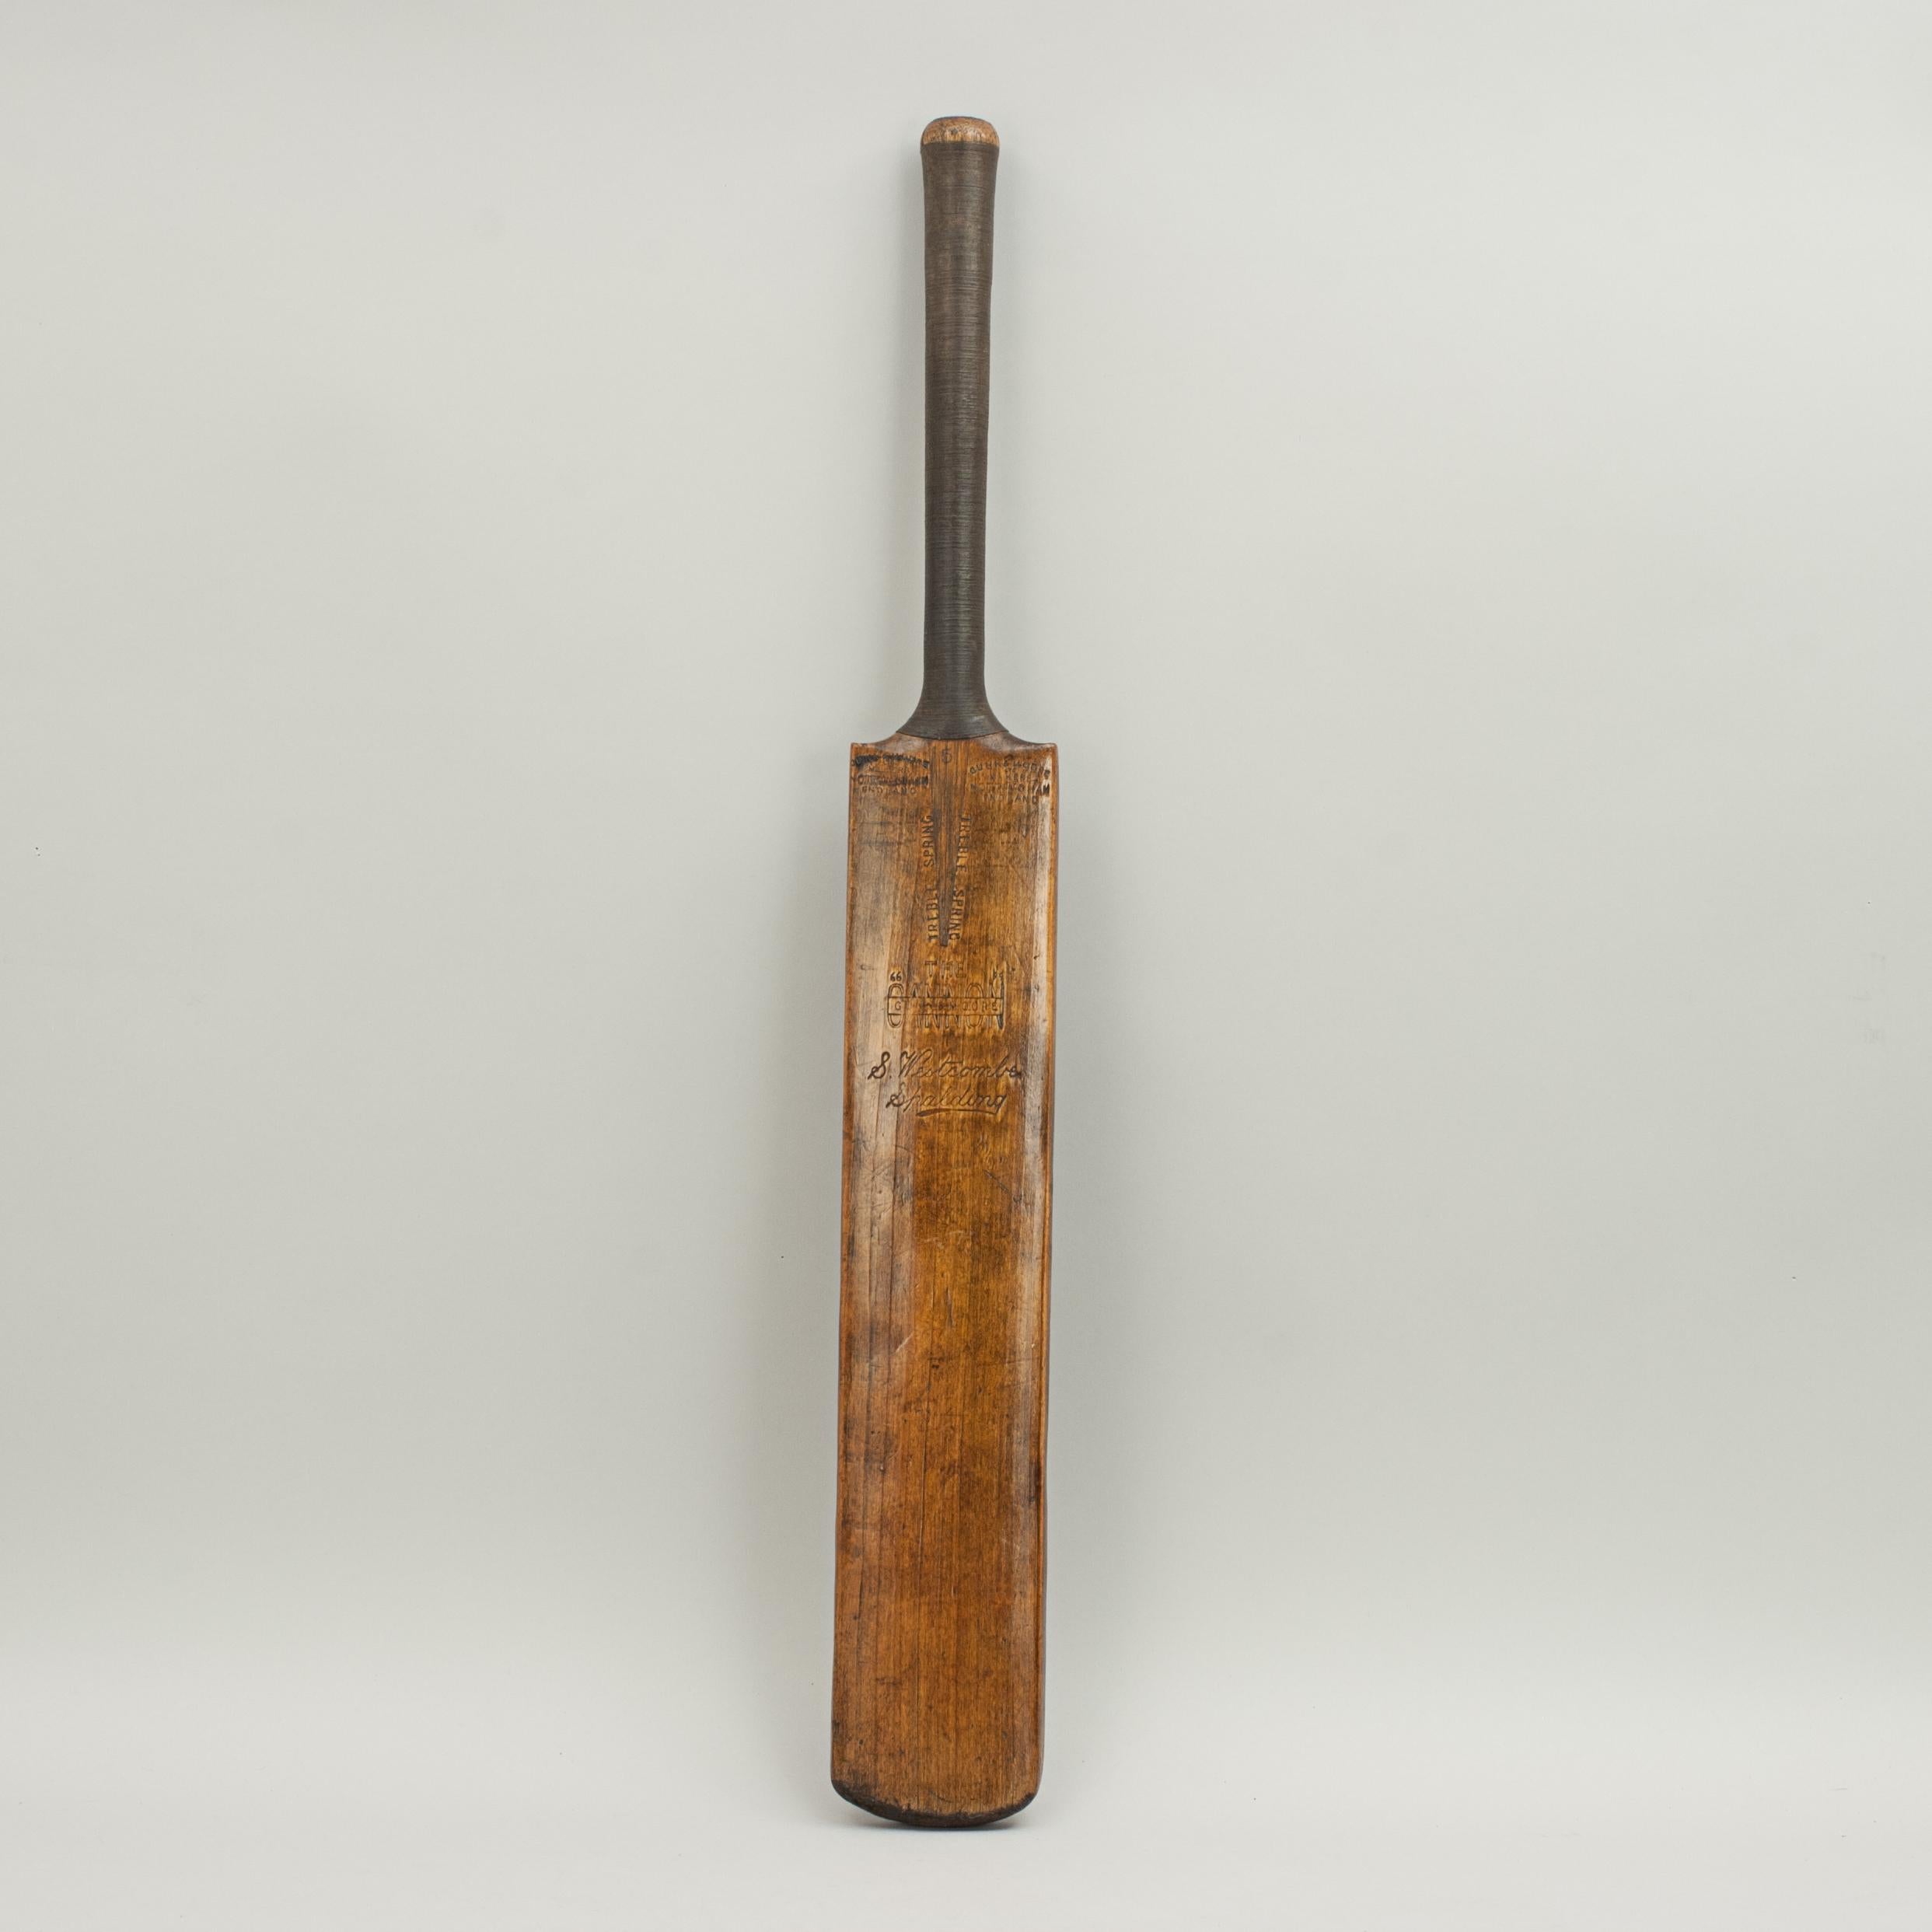 Sporting Art Vintage Gunn and Moore Cricket Bat, The Cannon, 1930s